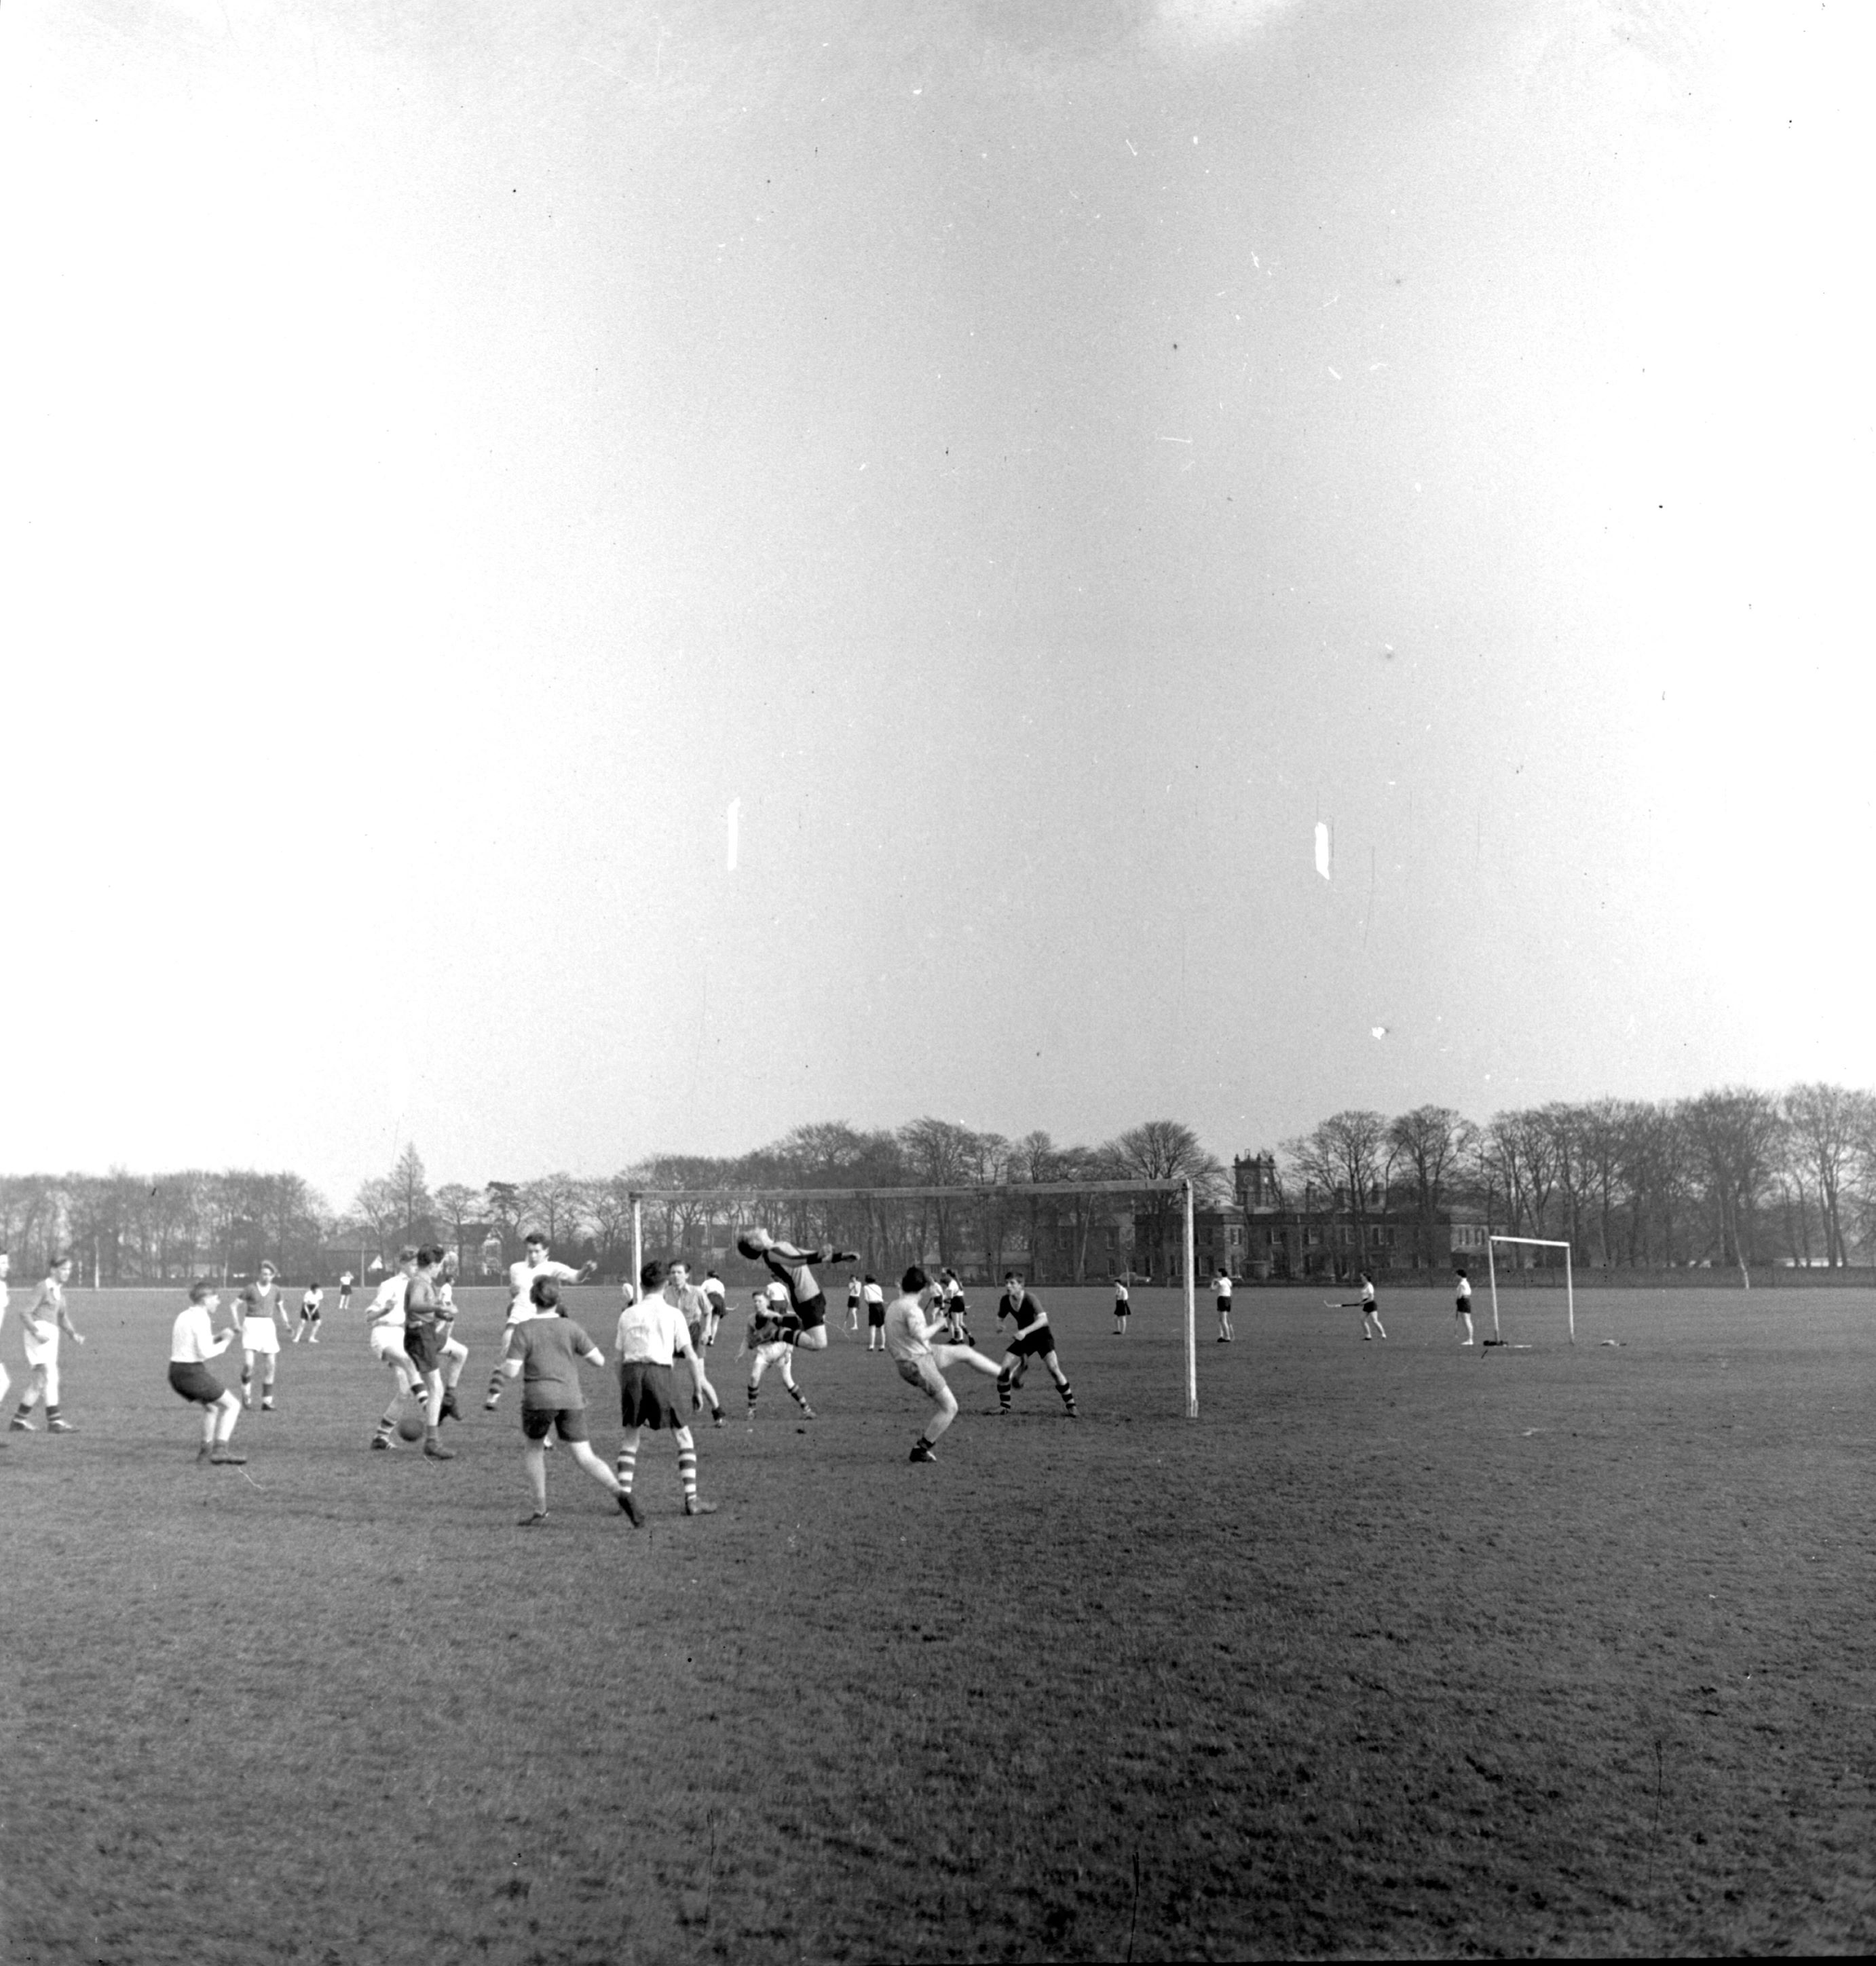 Hockey and football matches underway on The Stray in Harrogate in the 1950s.